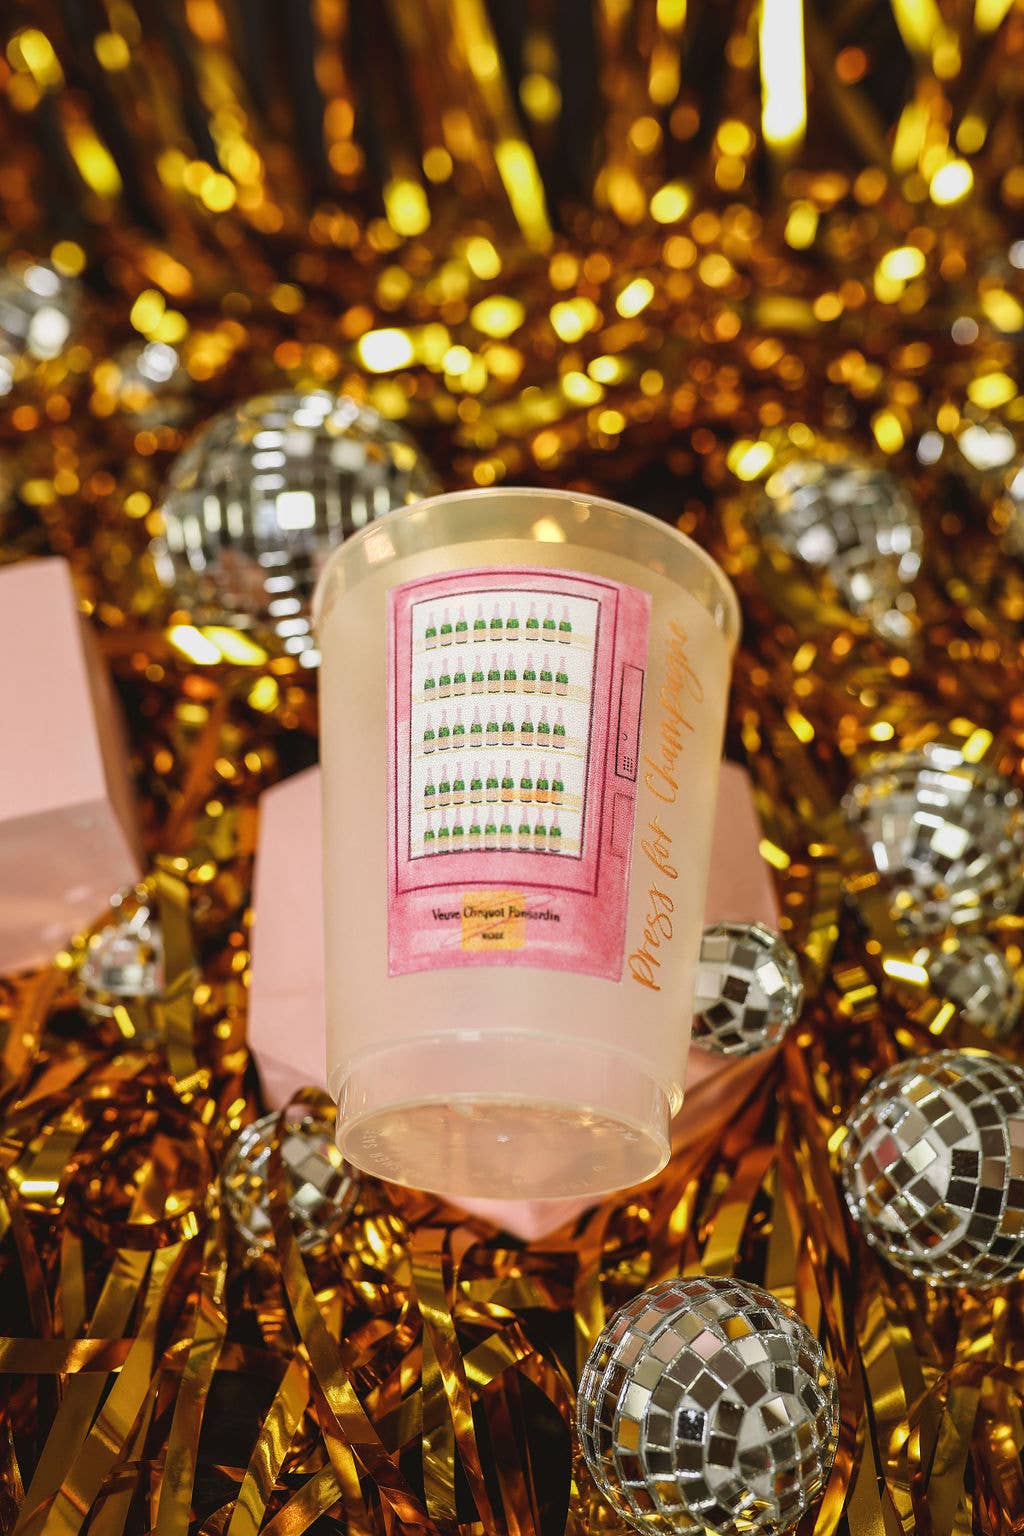 Press For Champagne Vending Machine Frosted Cups - The Preppy Bunny